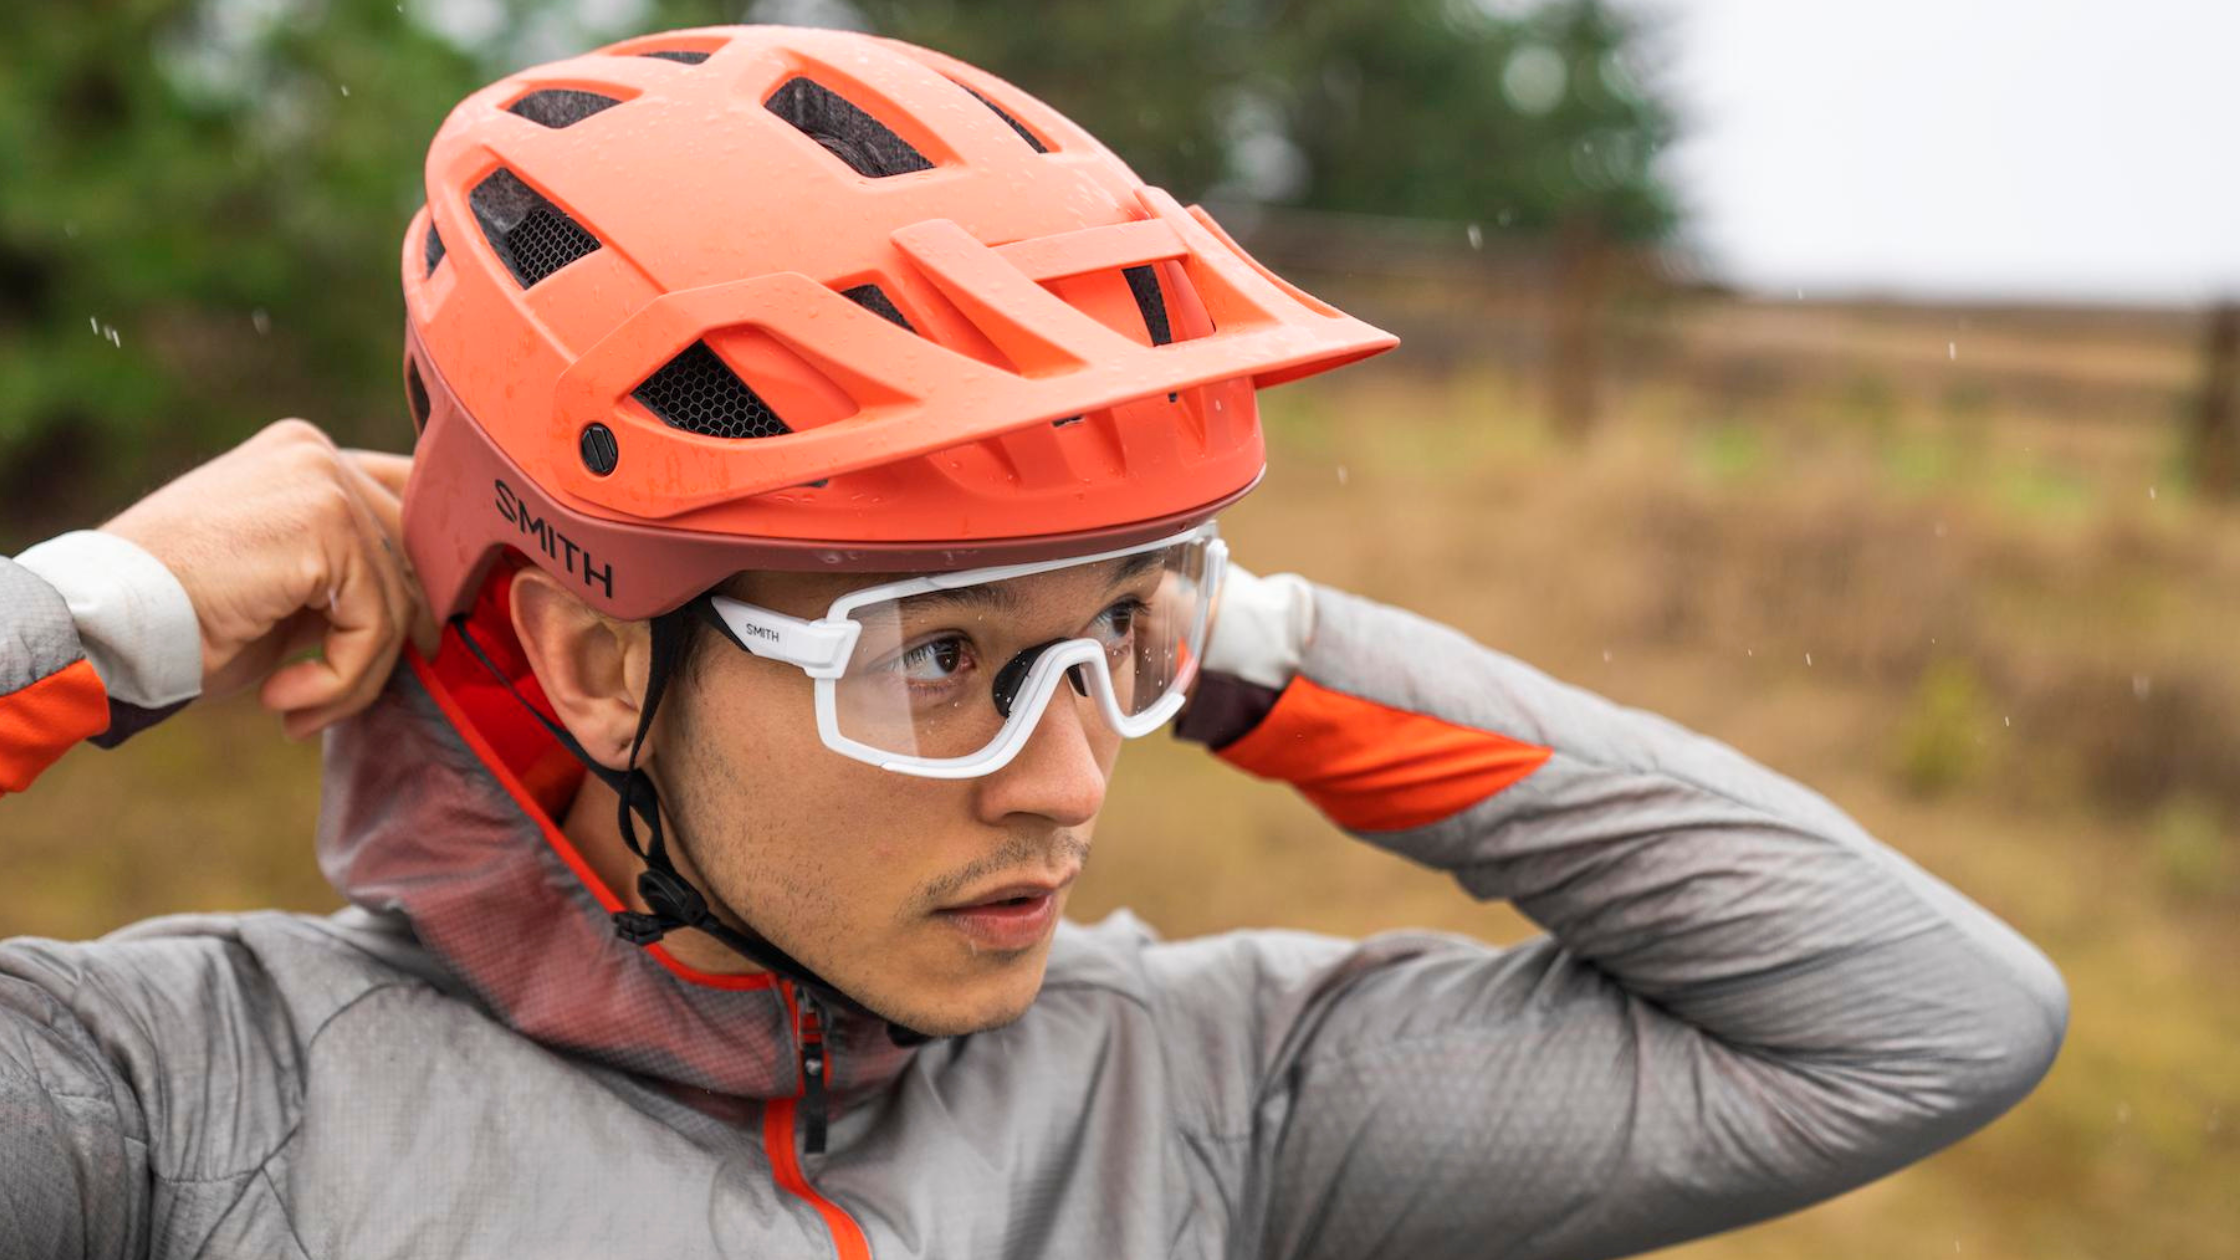 How to Measure Yourself for a Bike Helmet